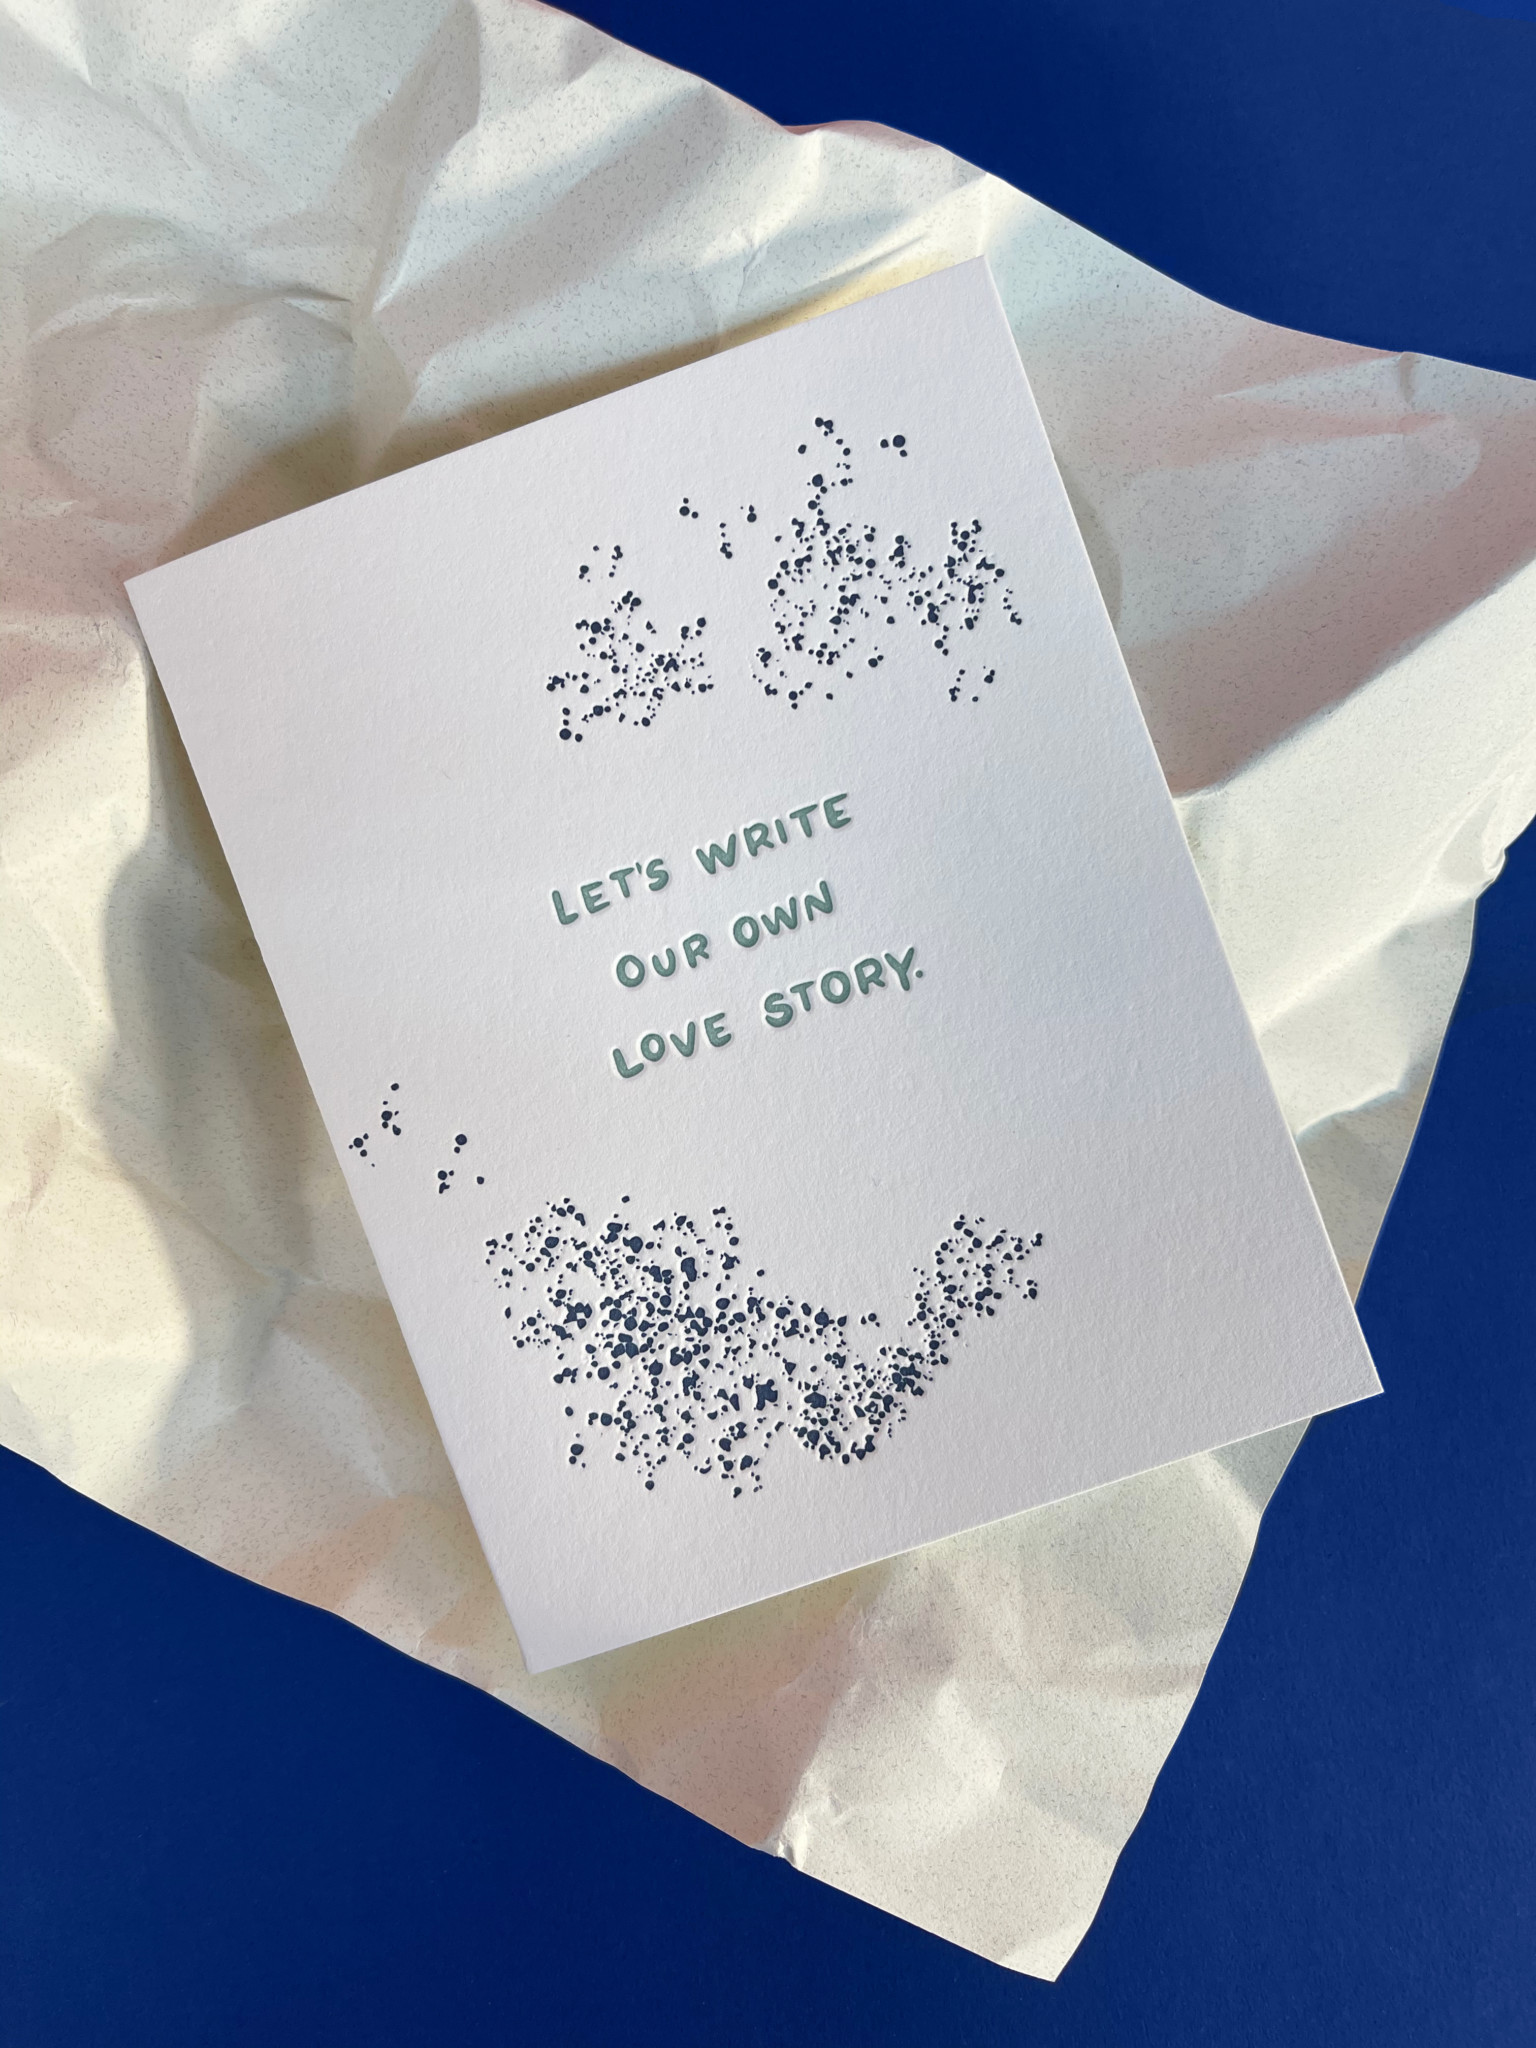 greeting card front reads "Let's write our own love story"